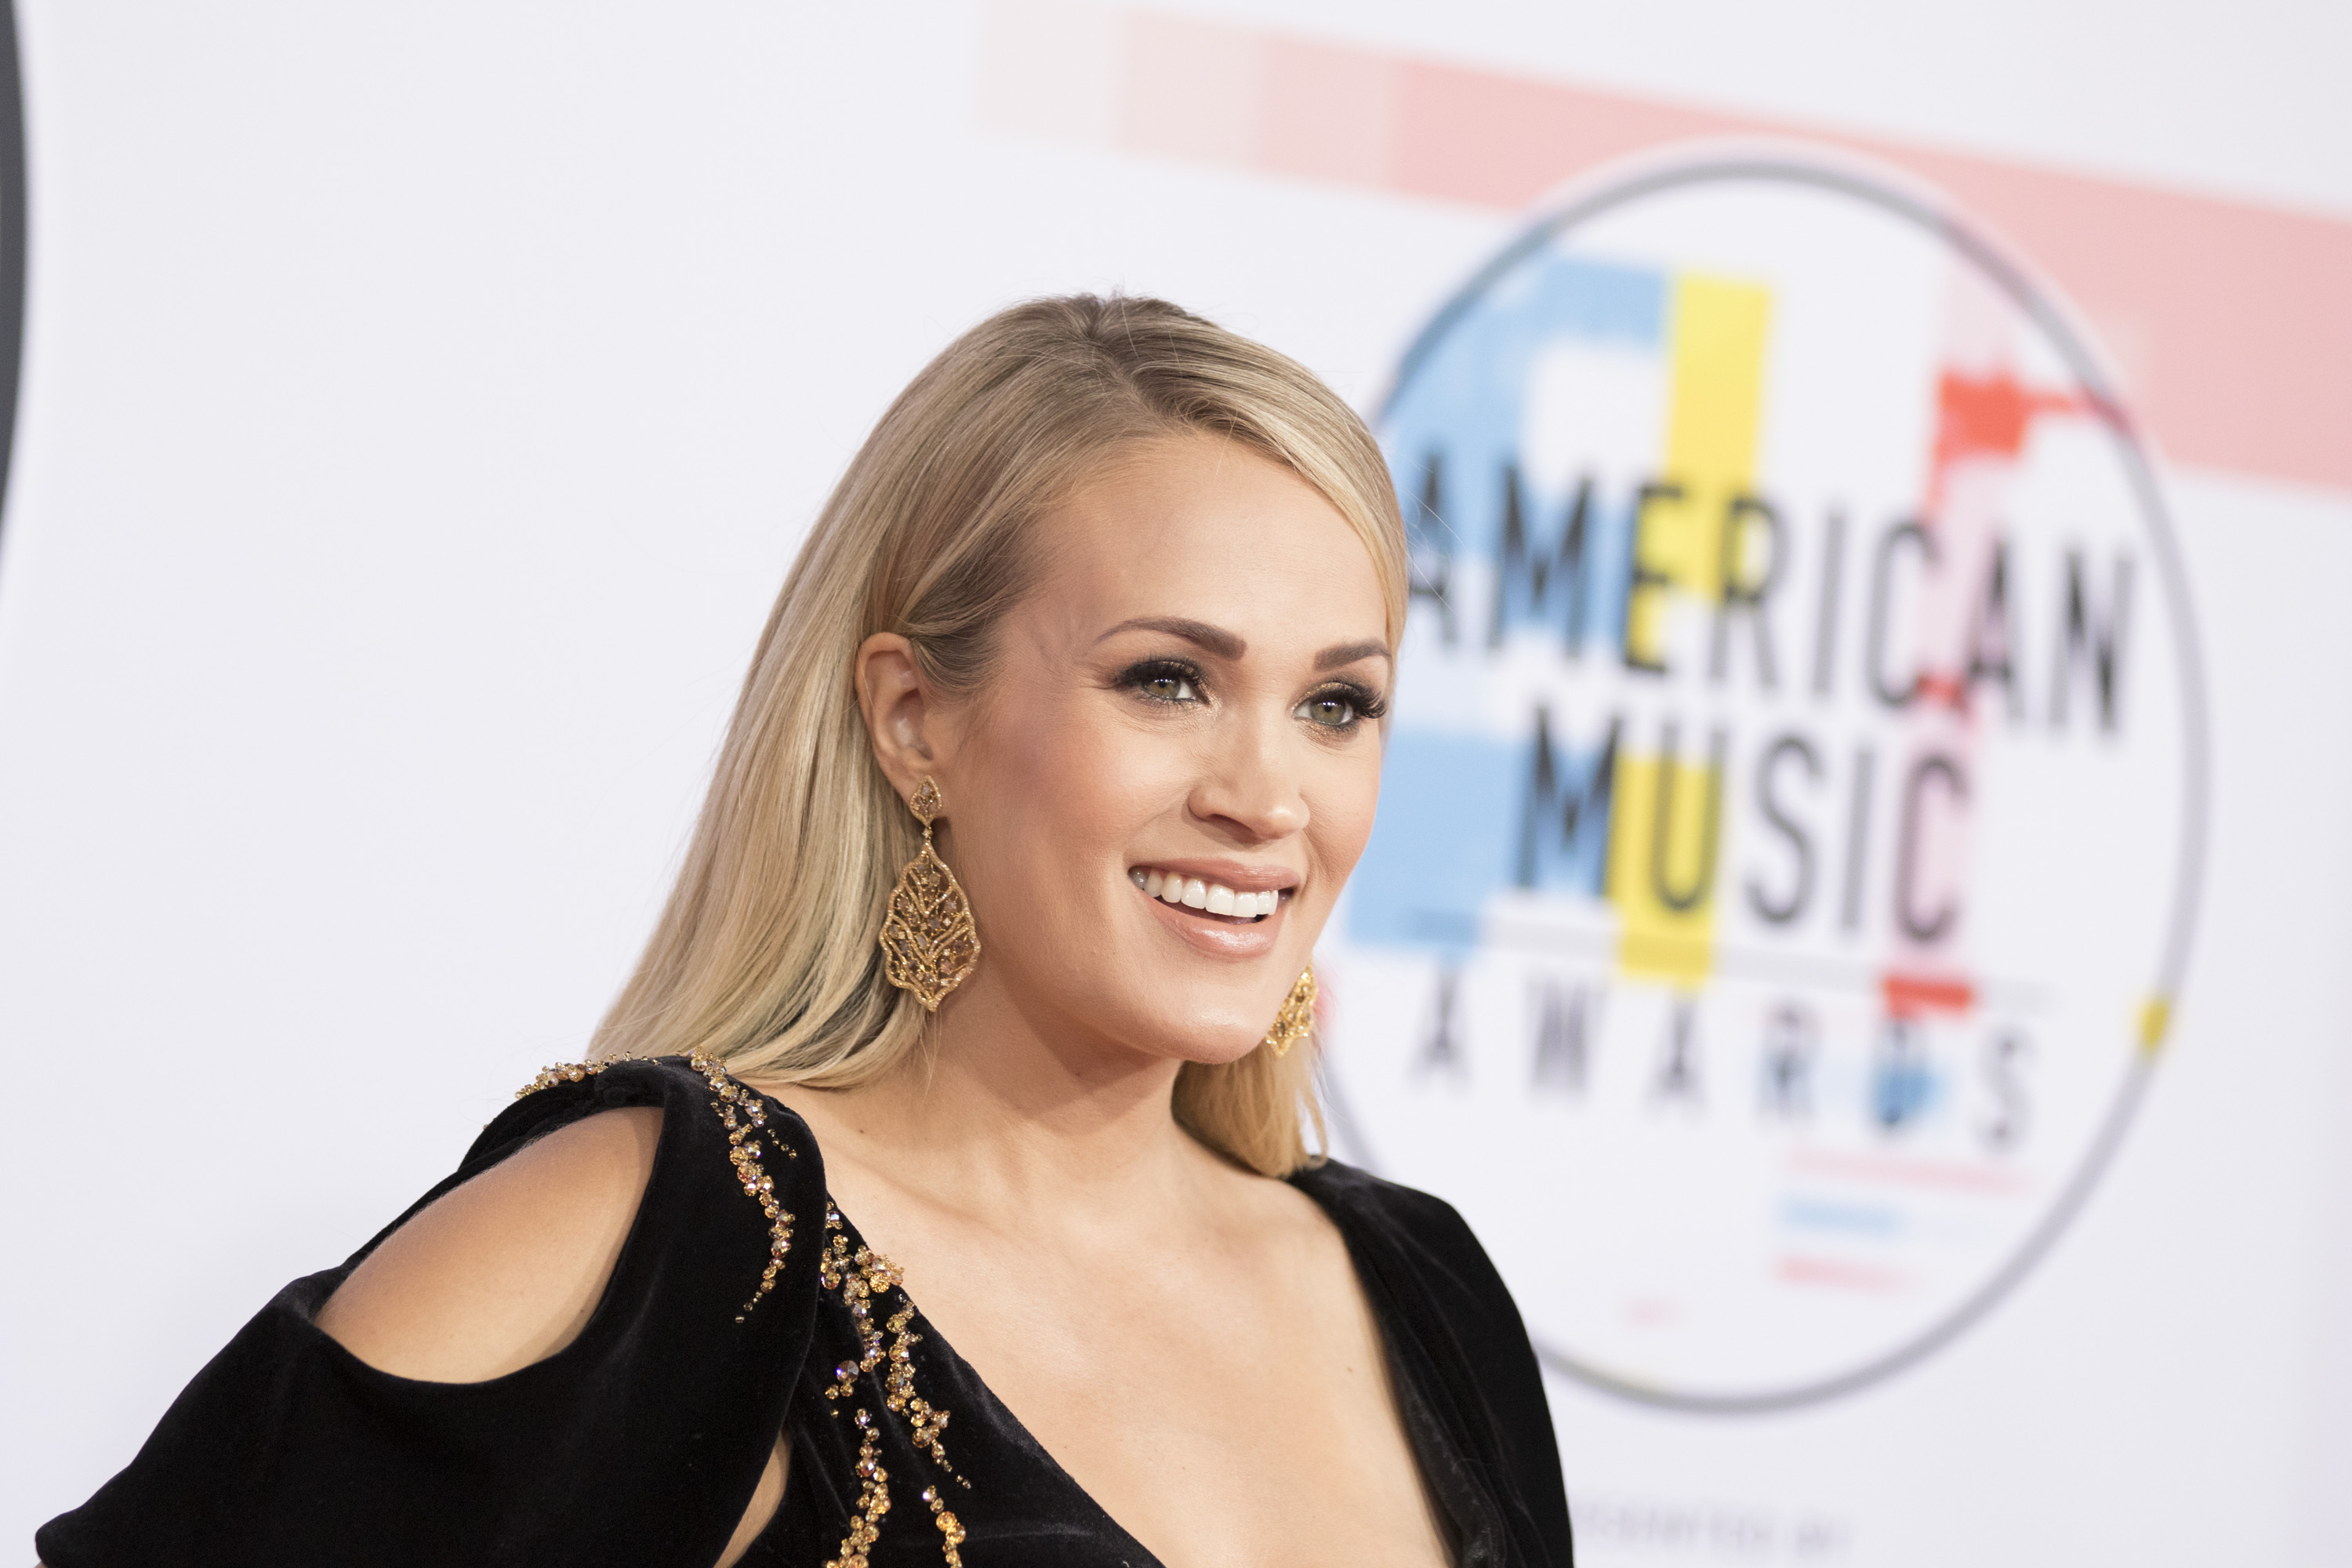 Carrie Underwood at the 2018 American Music Awards | Image Group LA via Getty Images